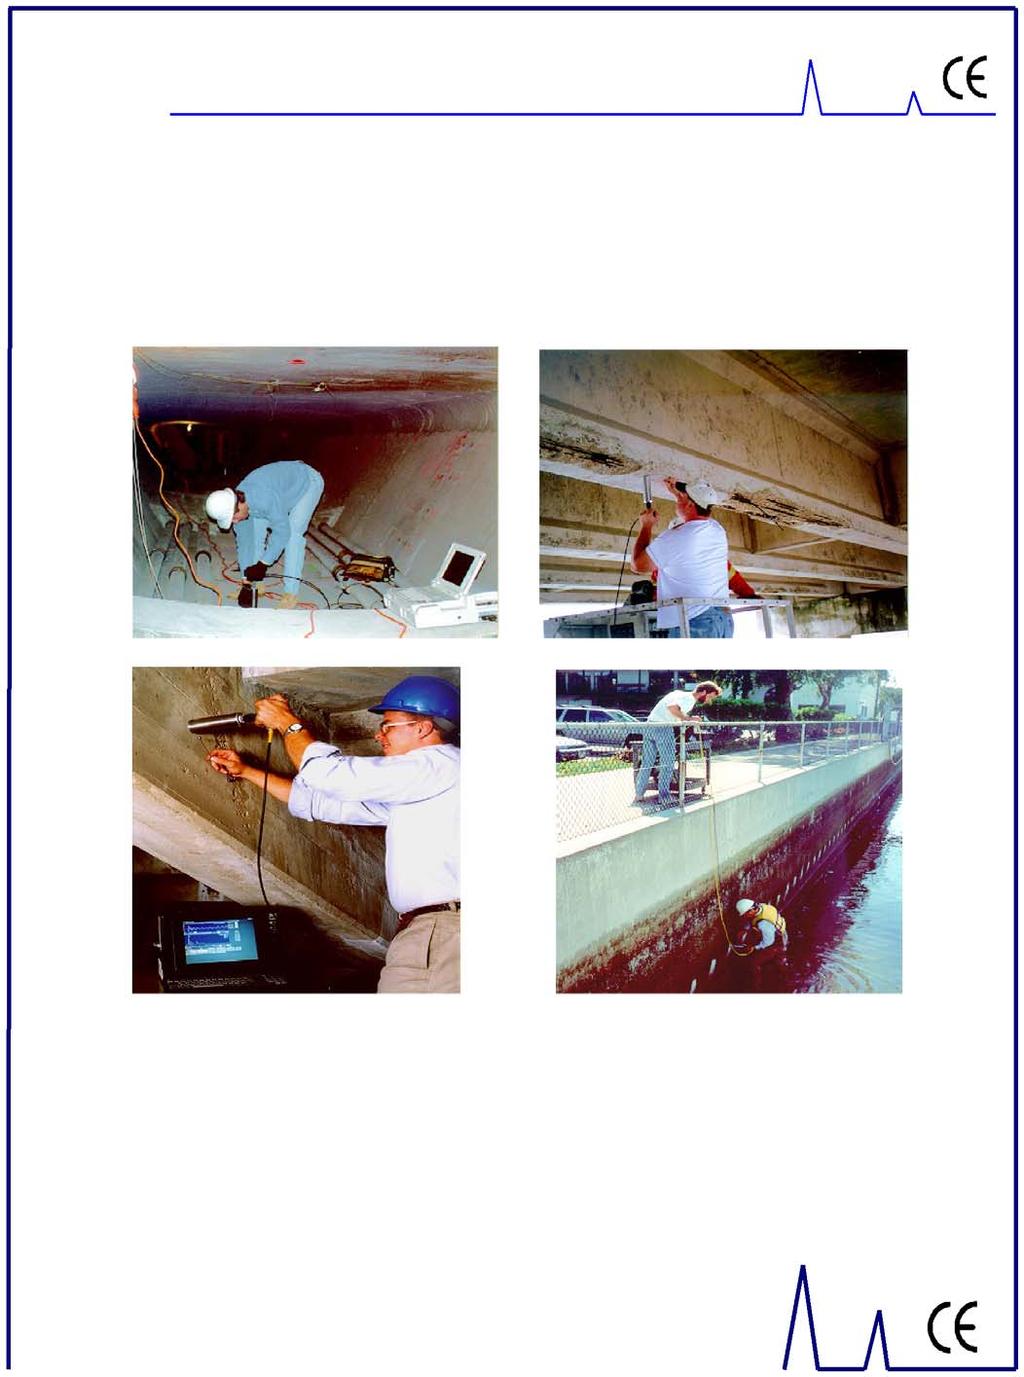 Field Instruments for Nondestructive Evaluation of Concrete & Masonry From the people who wrote